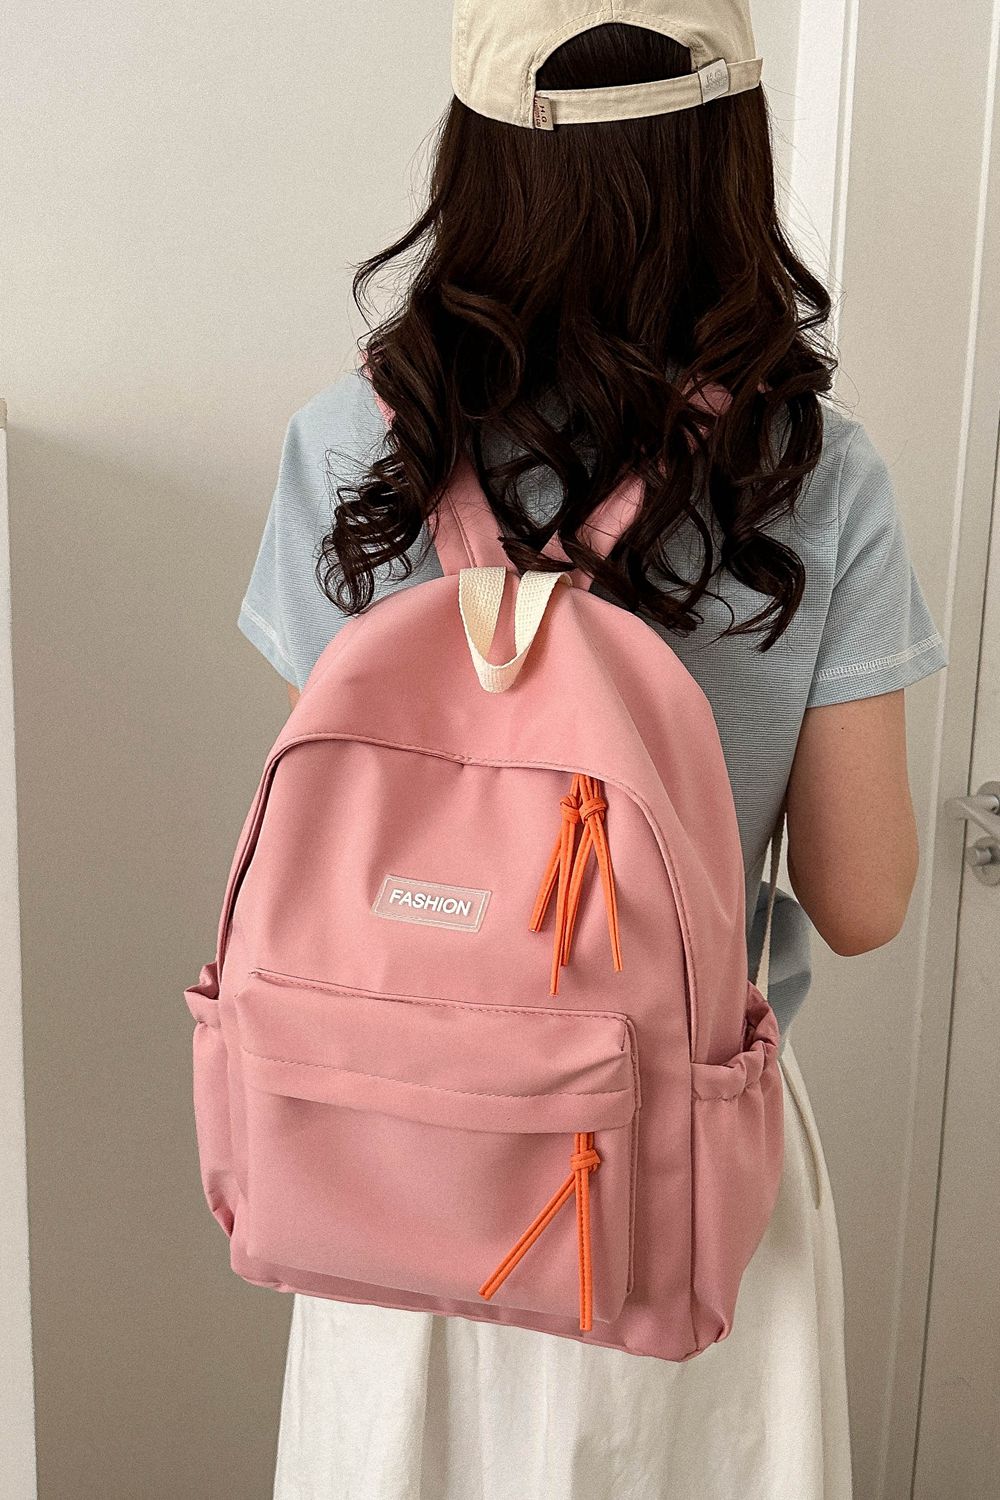 pink fashion backpack